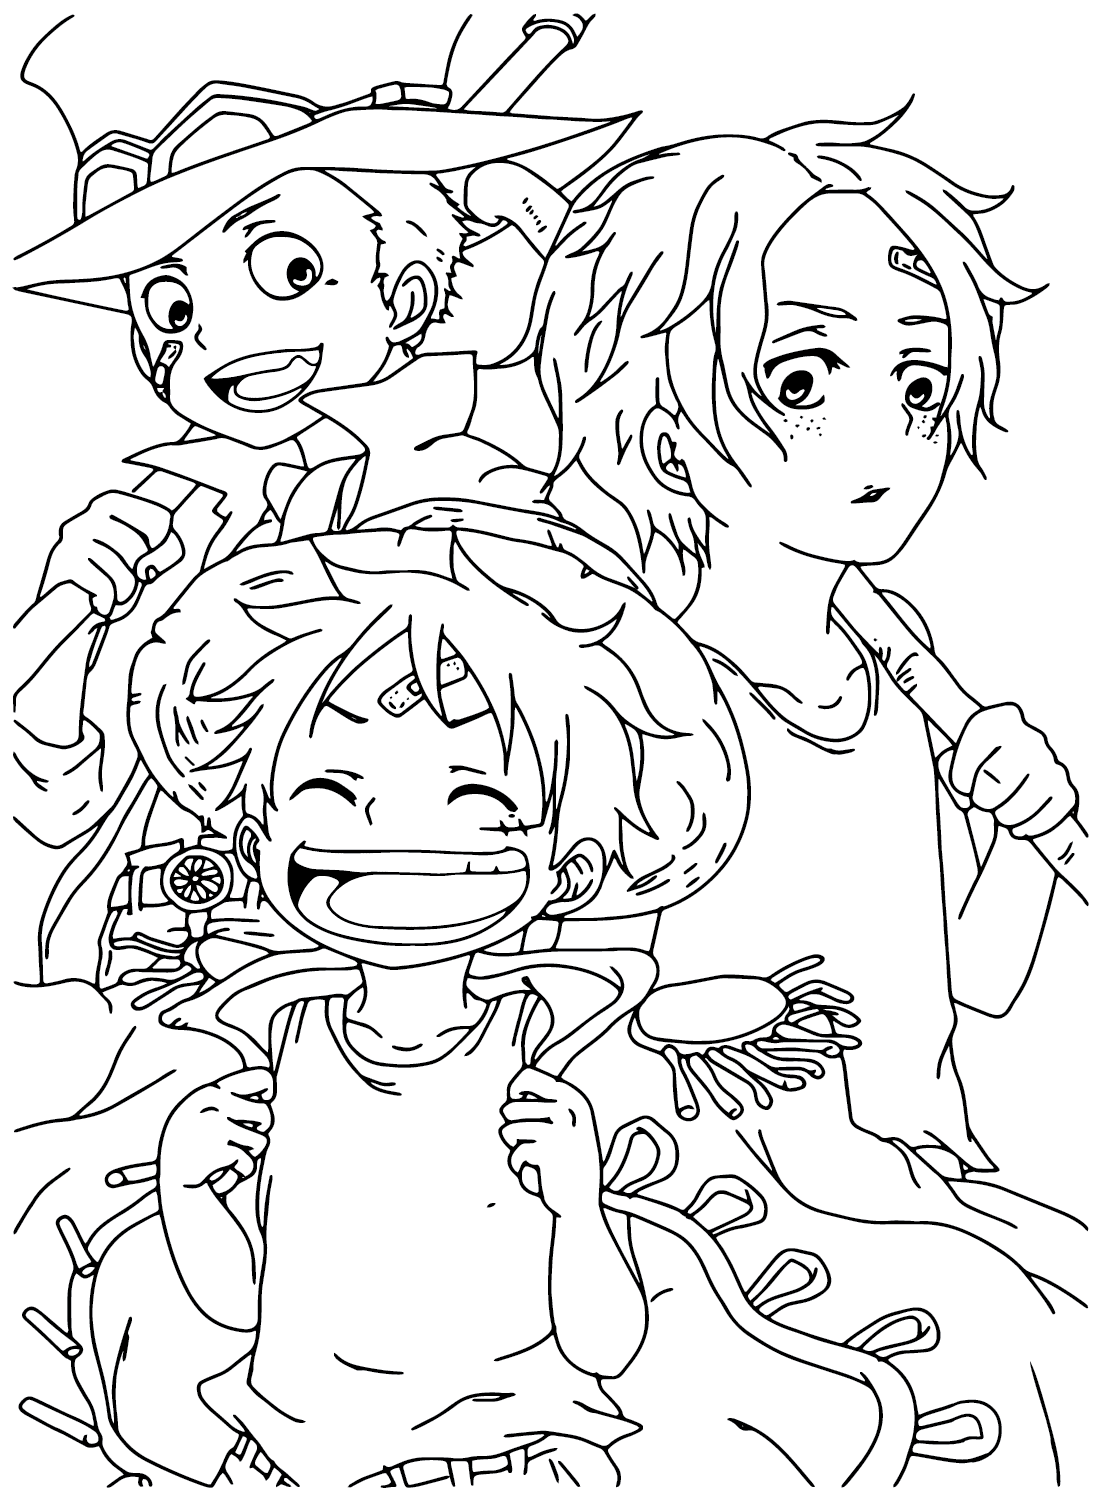 Portgas D. Ace, Sabo and Luffy to Color